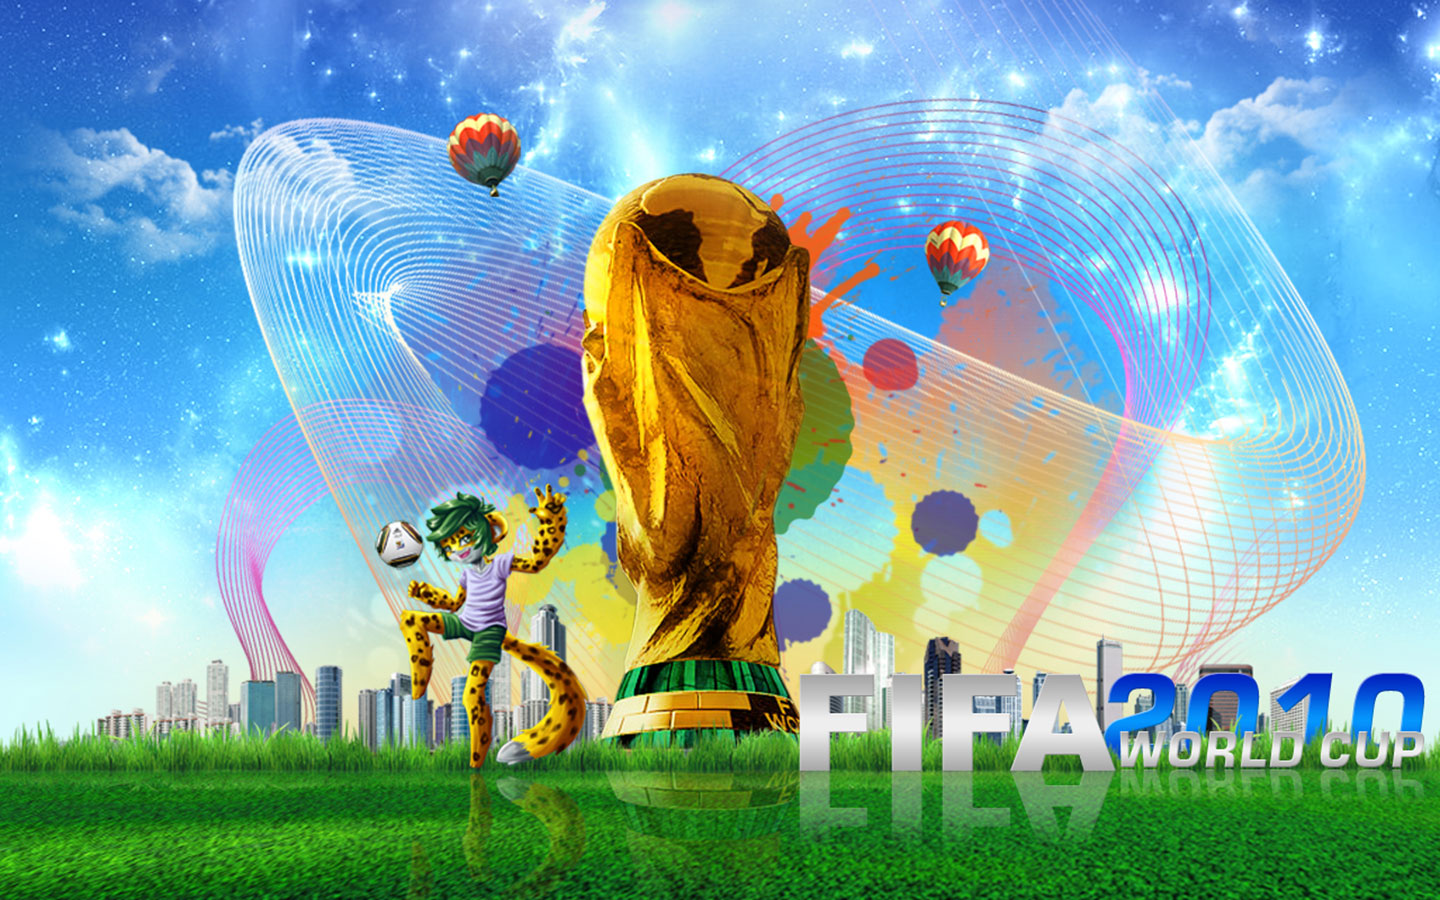 world cup,world cup 2010, South Africa, football, soccer, Wallpaper World Cup 2010 